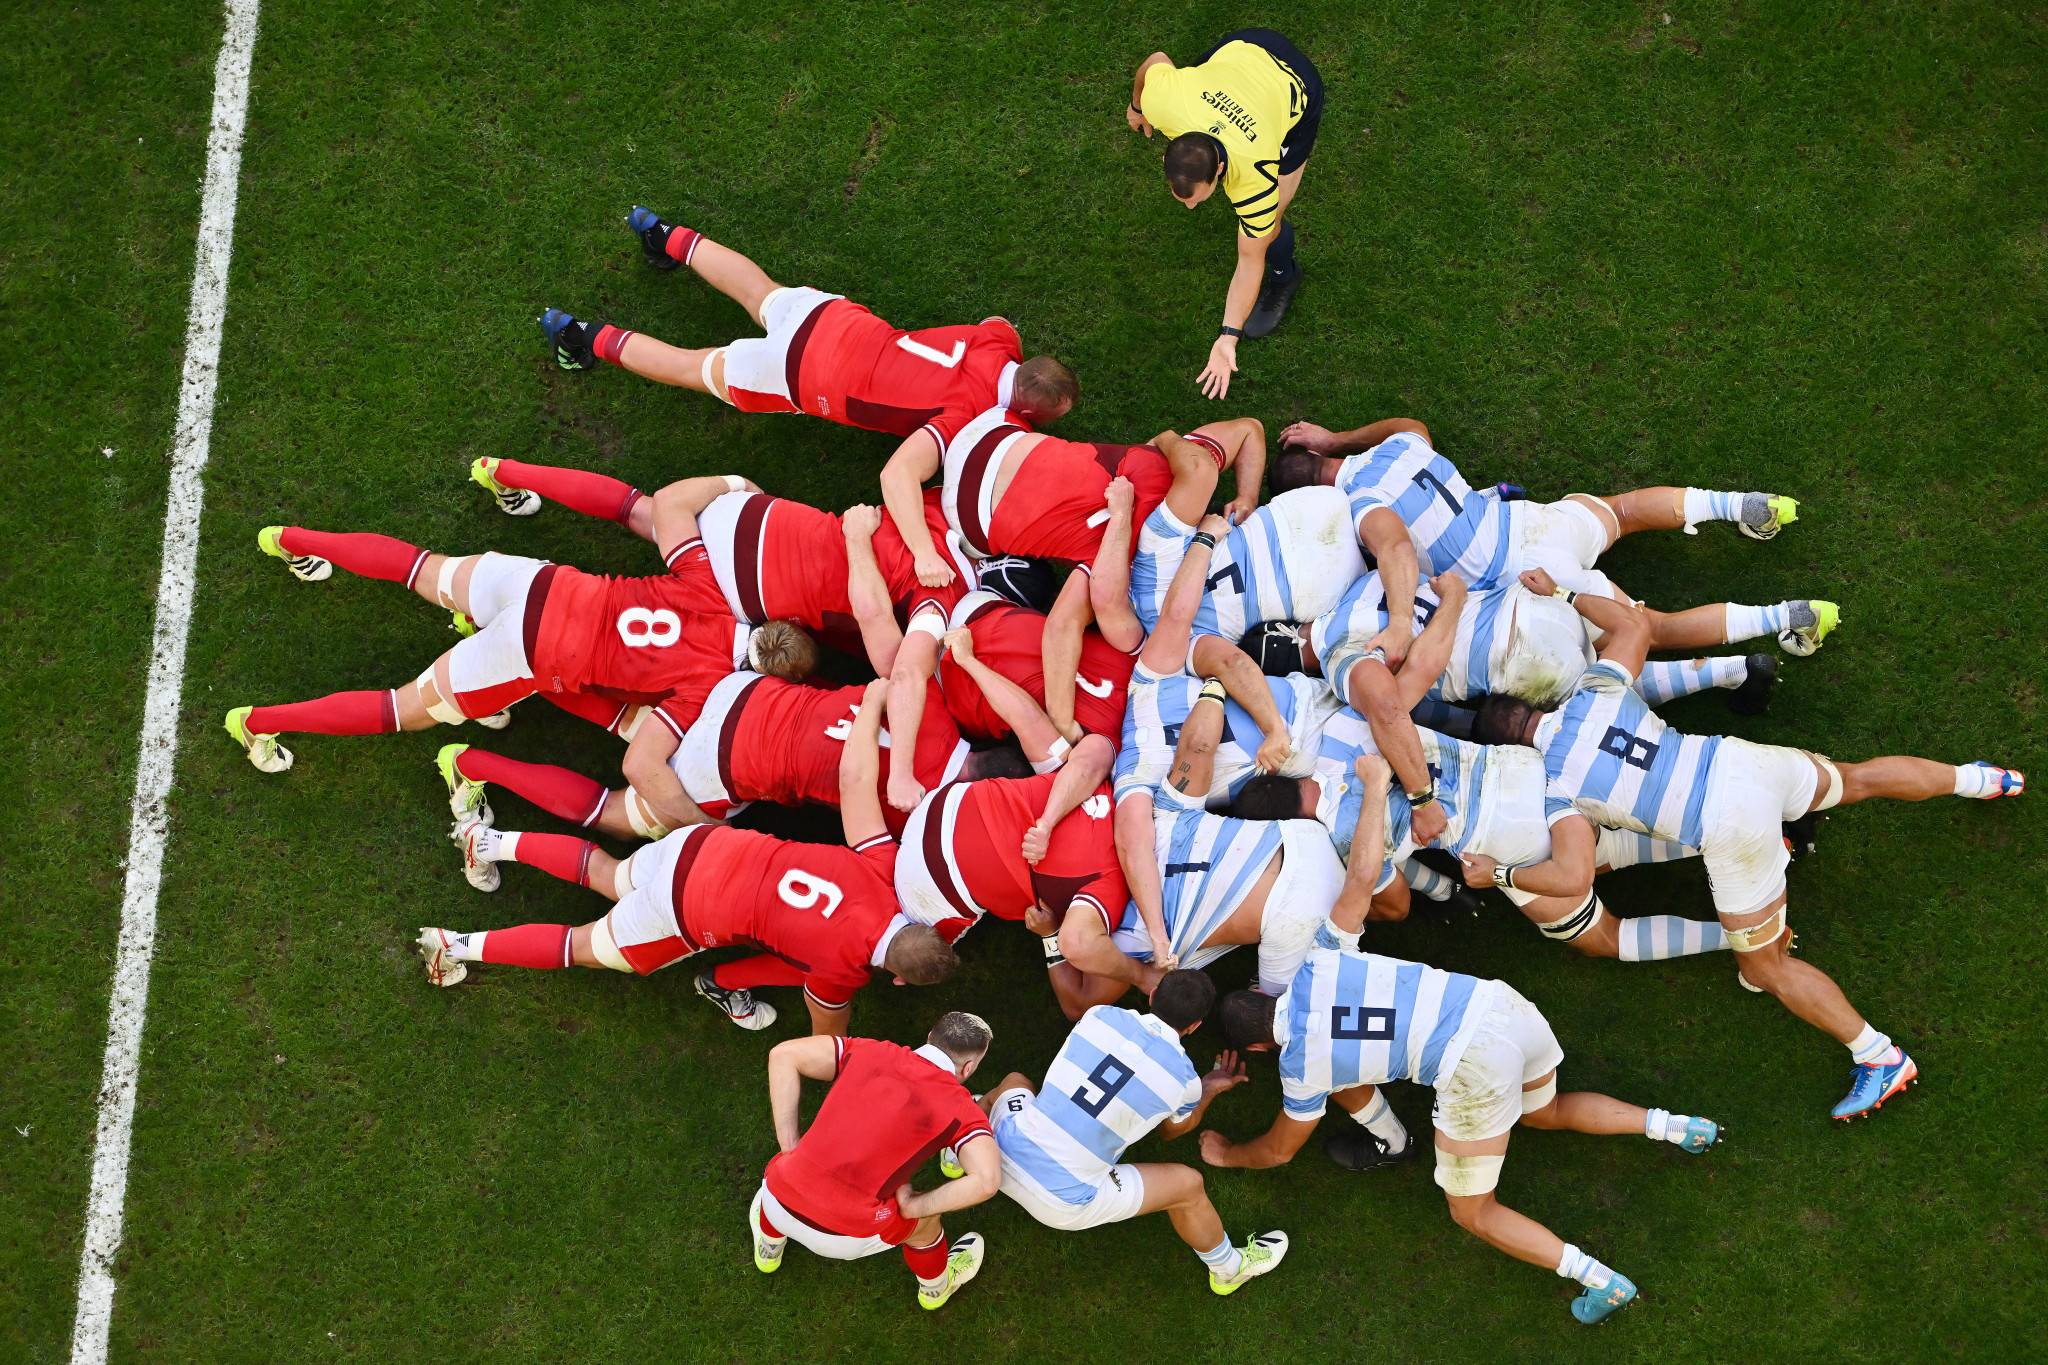 Argentina, playing in blue and white, overcame Wales to book a semi-final with New Zealand ©Getty Images